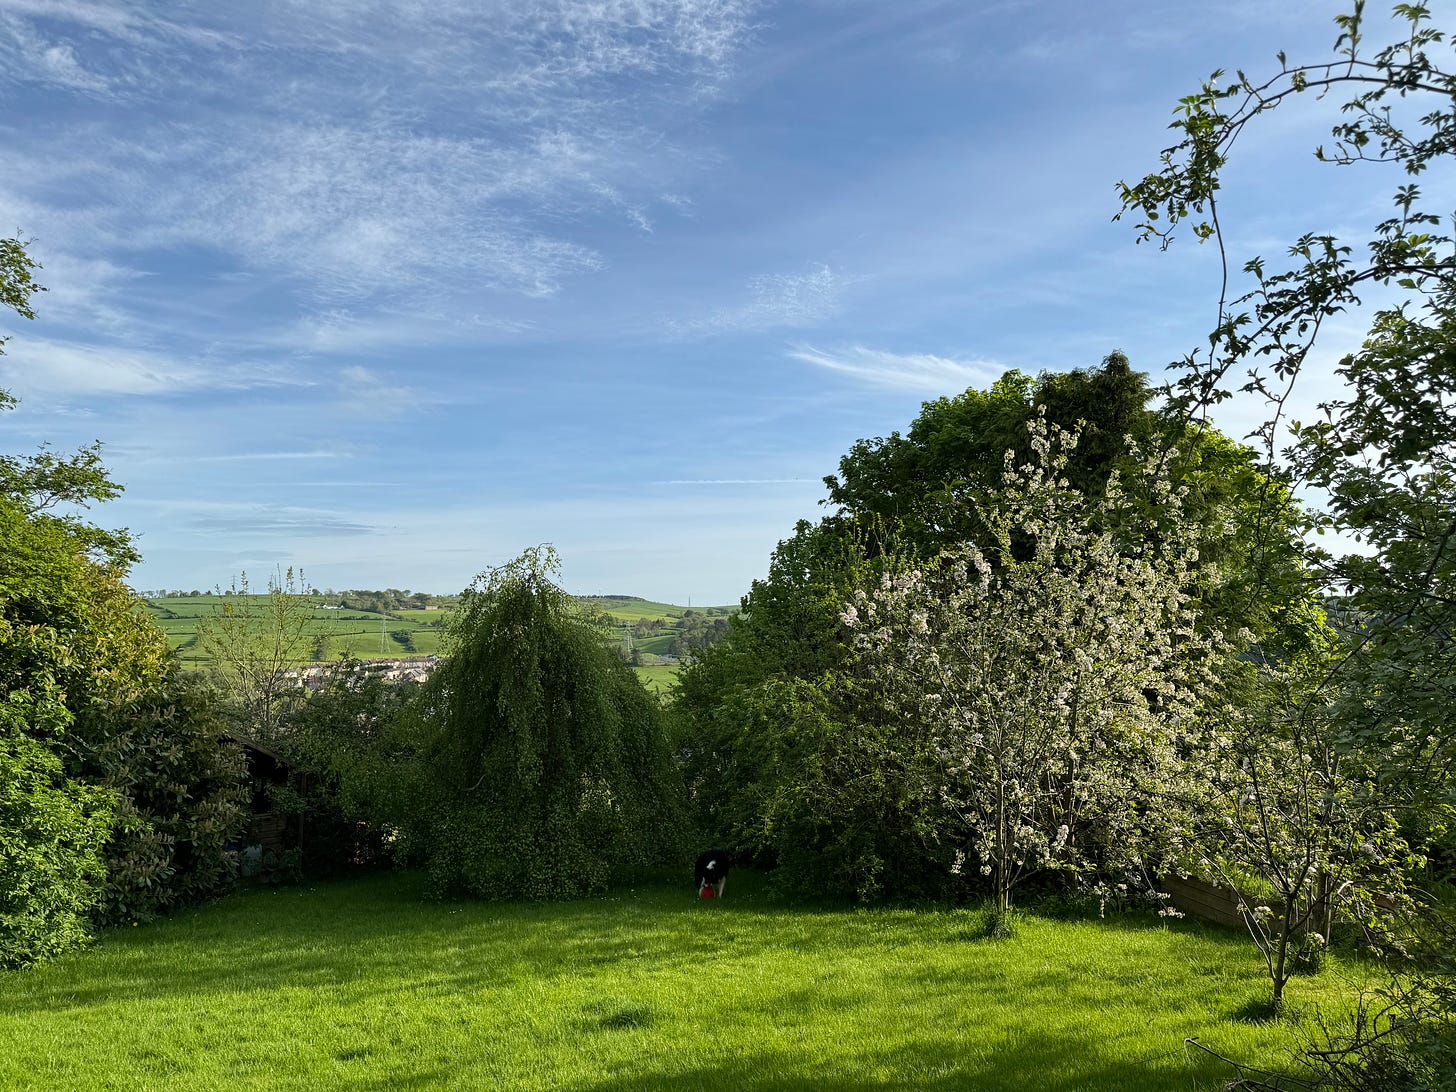 A picture of a garden in Scotland in May. Blue sky with light, wispy white cloud, a very green lawn surrounded by trees. To the right are a couple of young blossom trees. In the shade at the bottom, a collie dog is picking up his beloved frisbee.